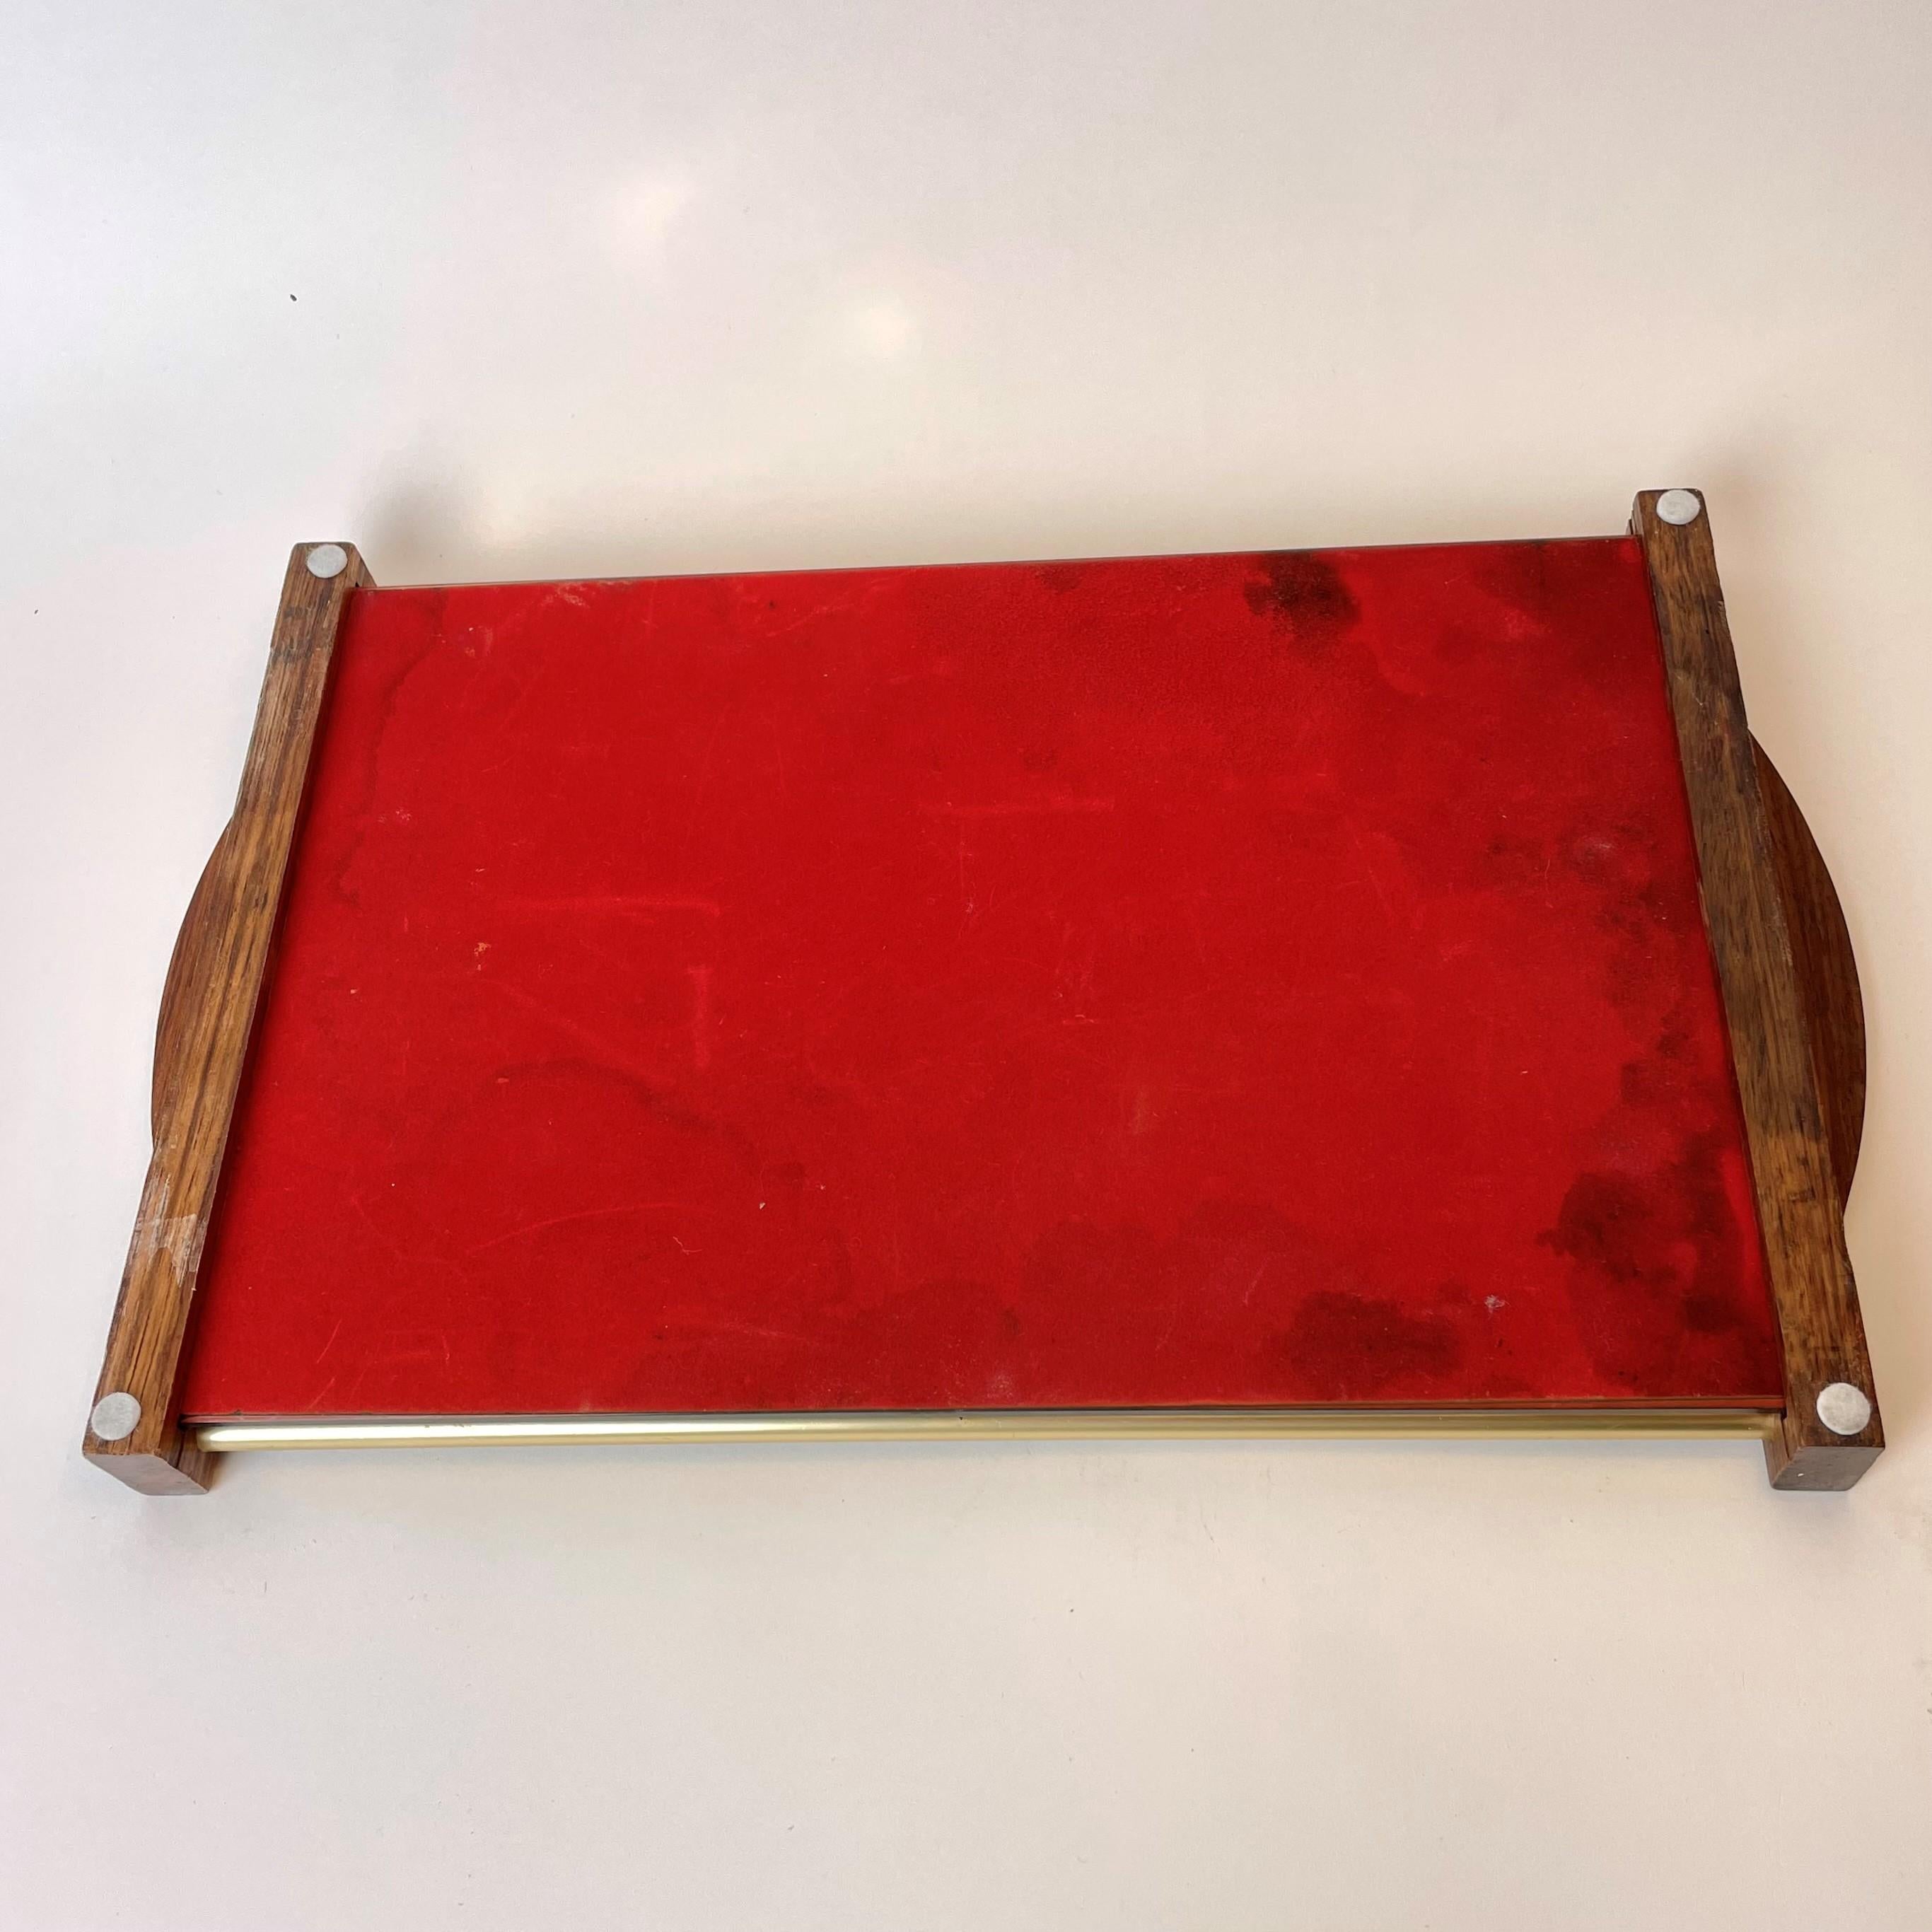 Mid-20th Century Glass Tray in Cool Art Deco from the, 1920s - 1930s For Sale